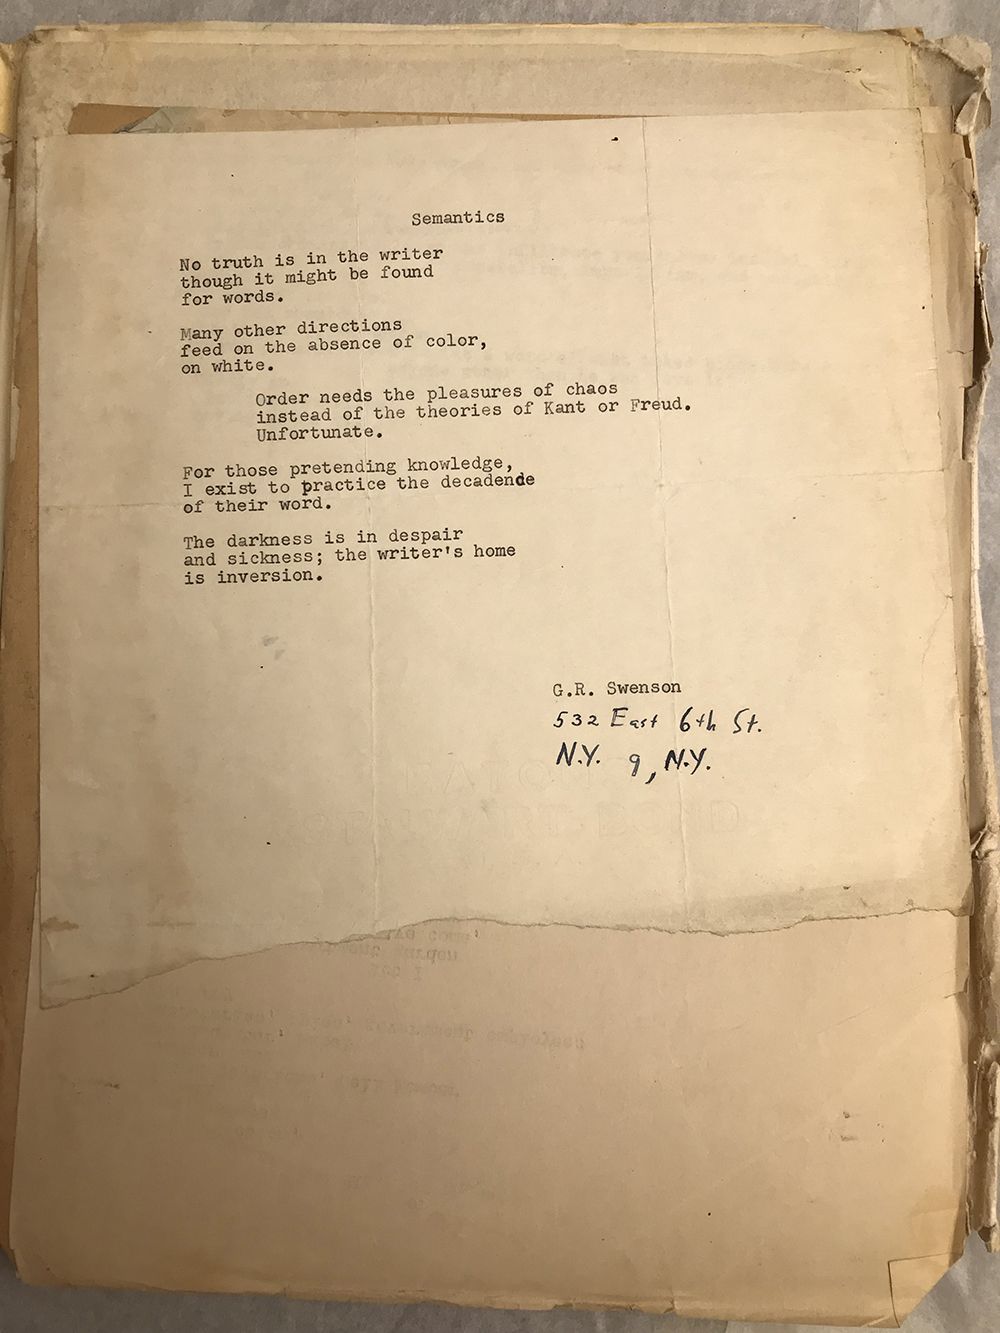 Yellowed page containing a typed poem by Gene Swenson